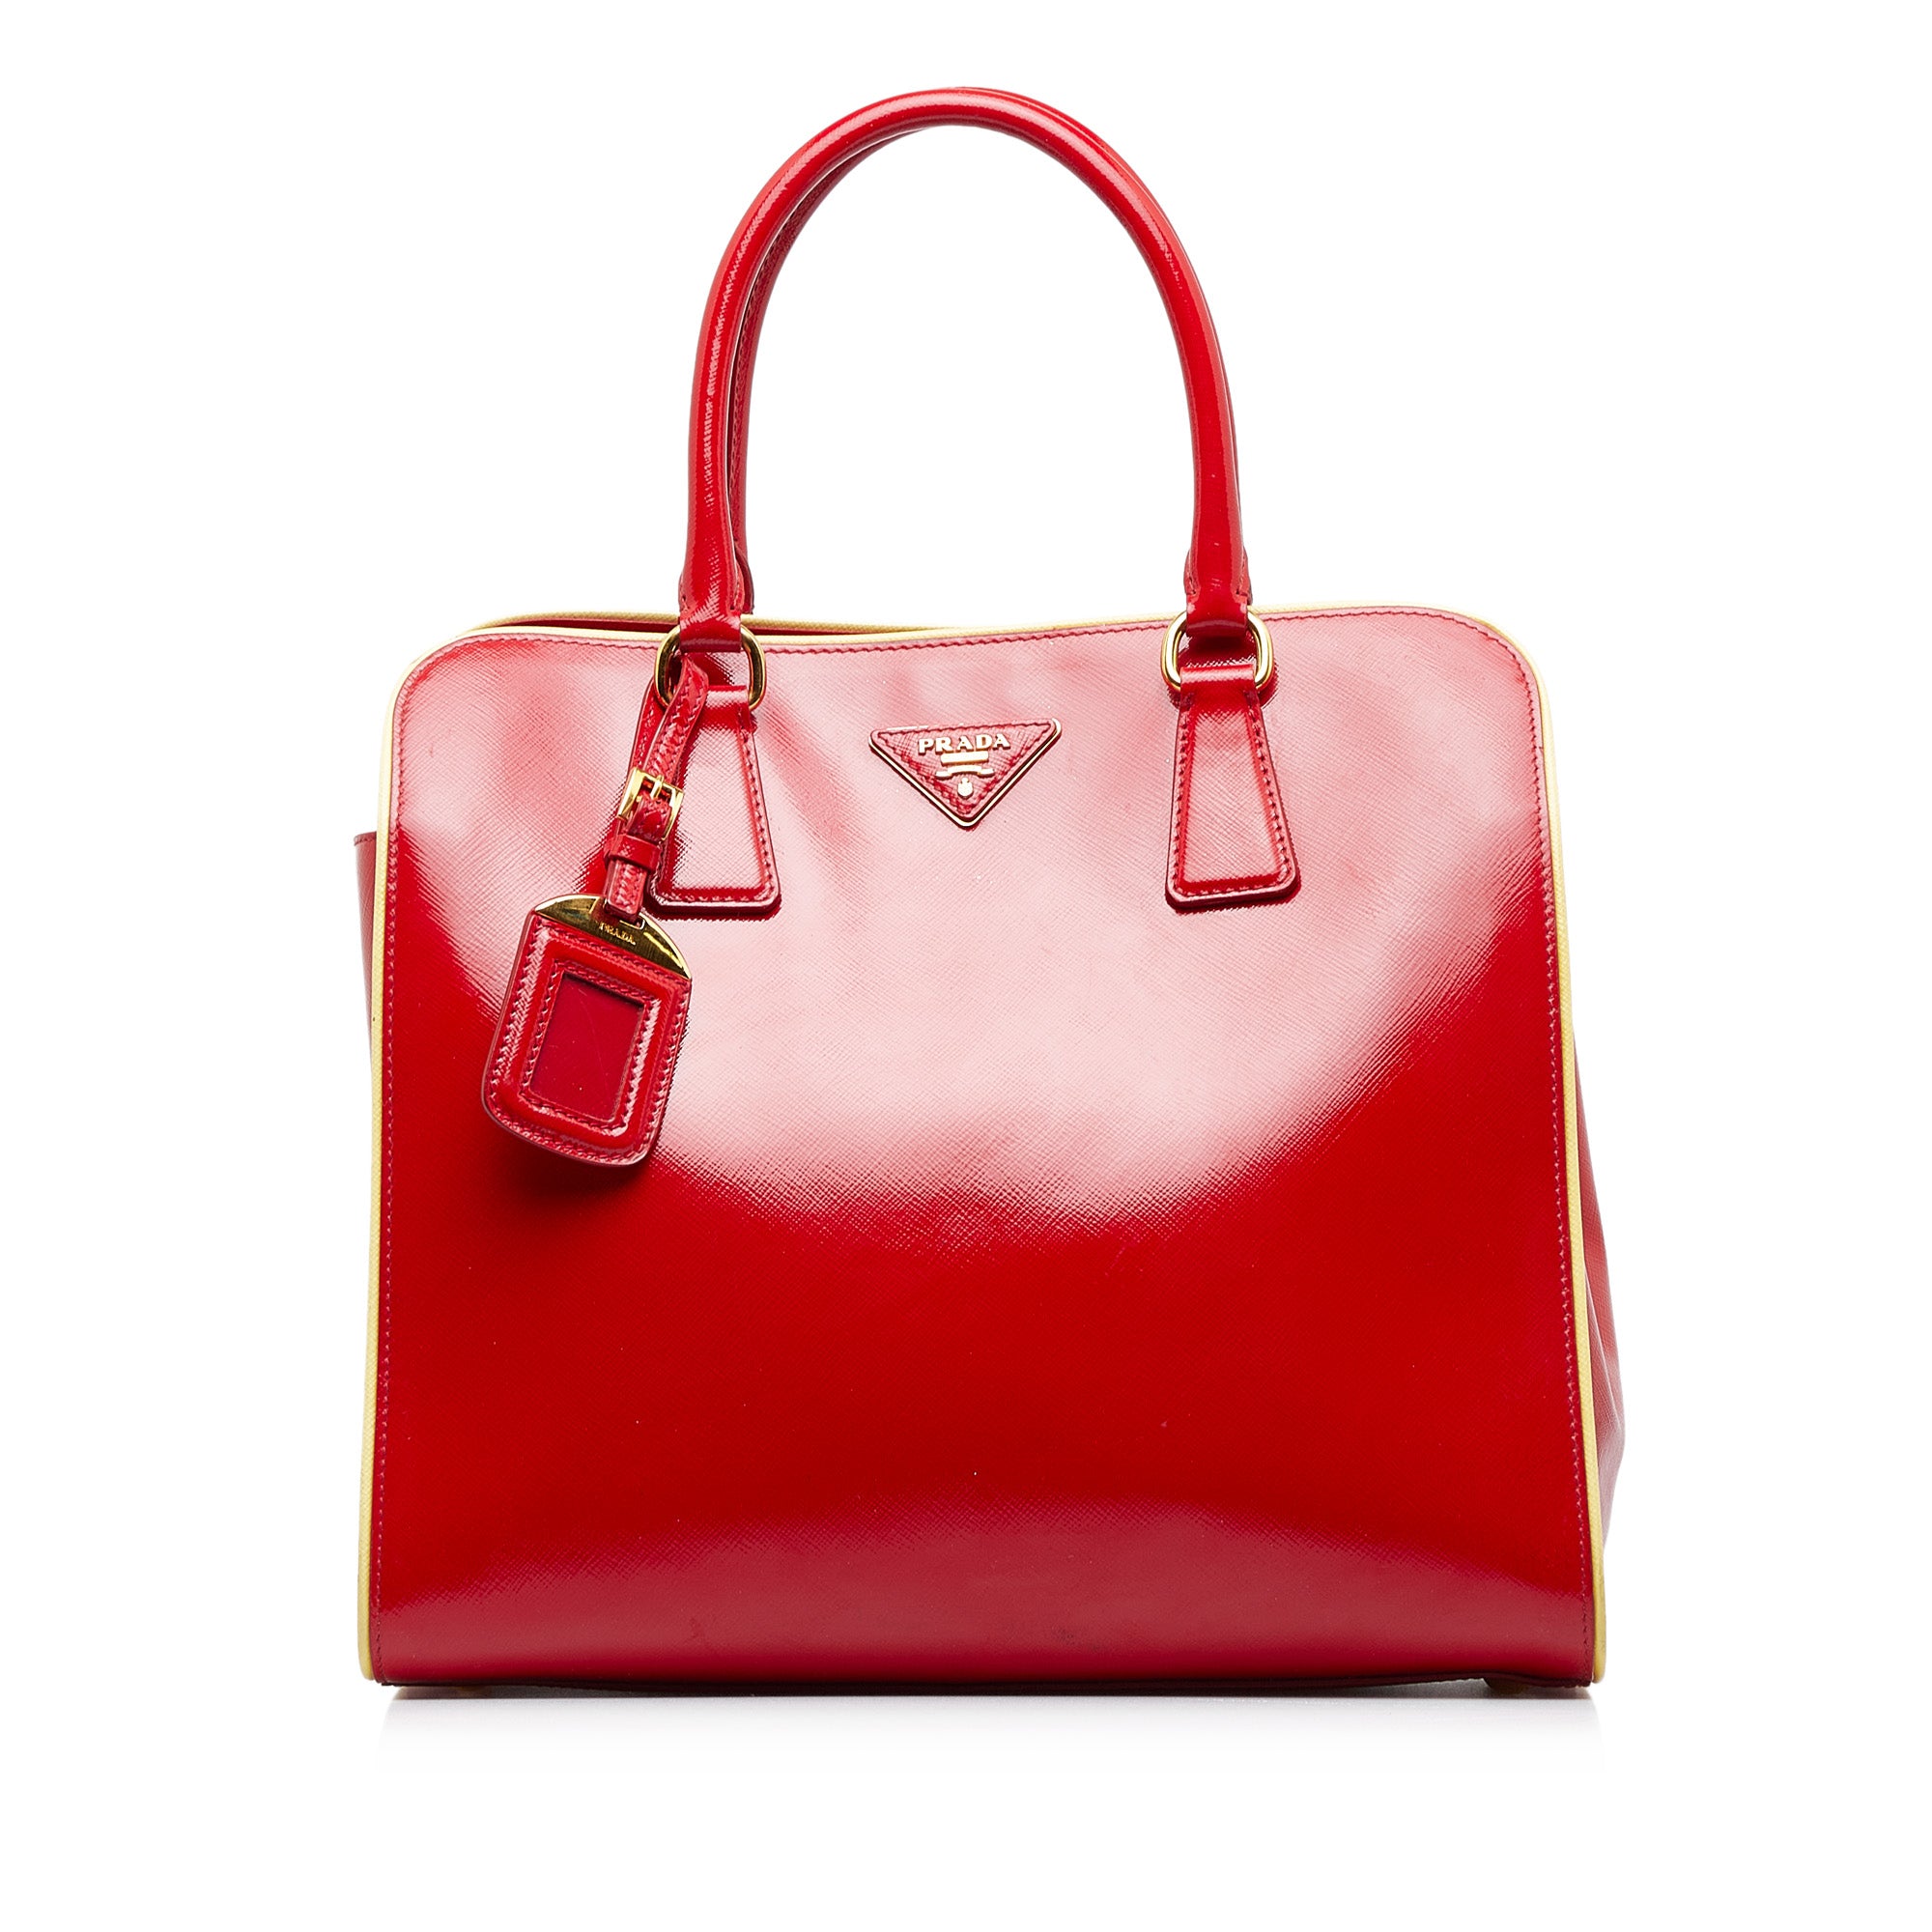 Louis Vuitton - Authenticated Purse - Patent Leather Red Plain for Women, Never Worn